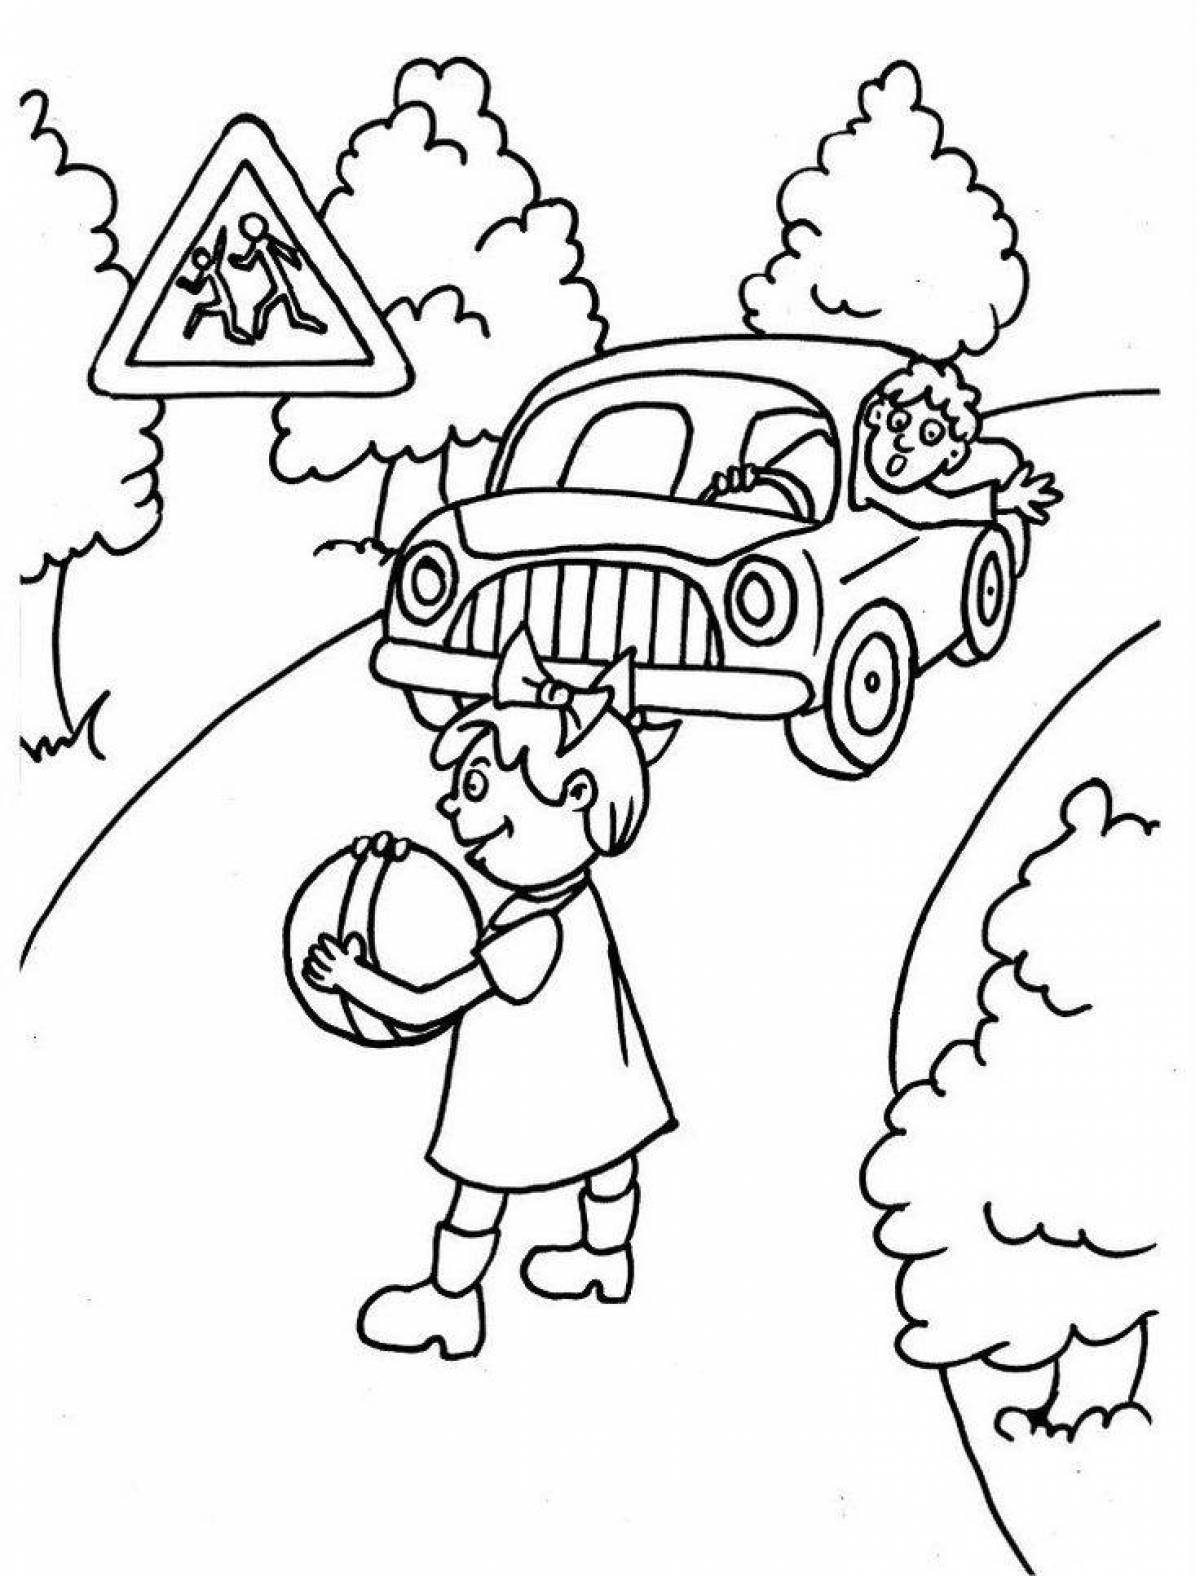 Coloring page amazing rules of the road